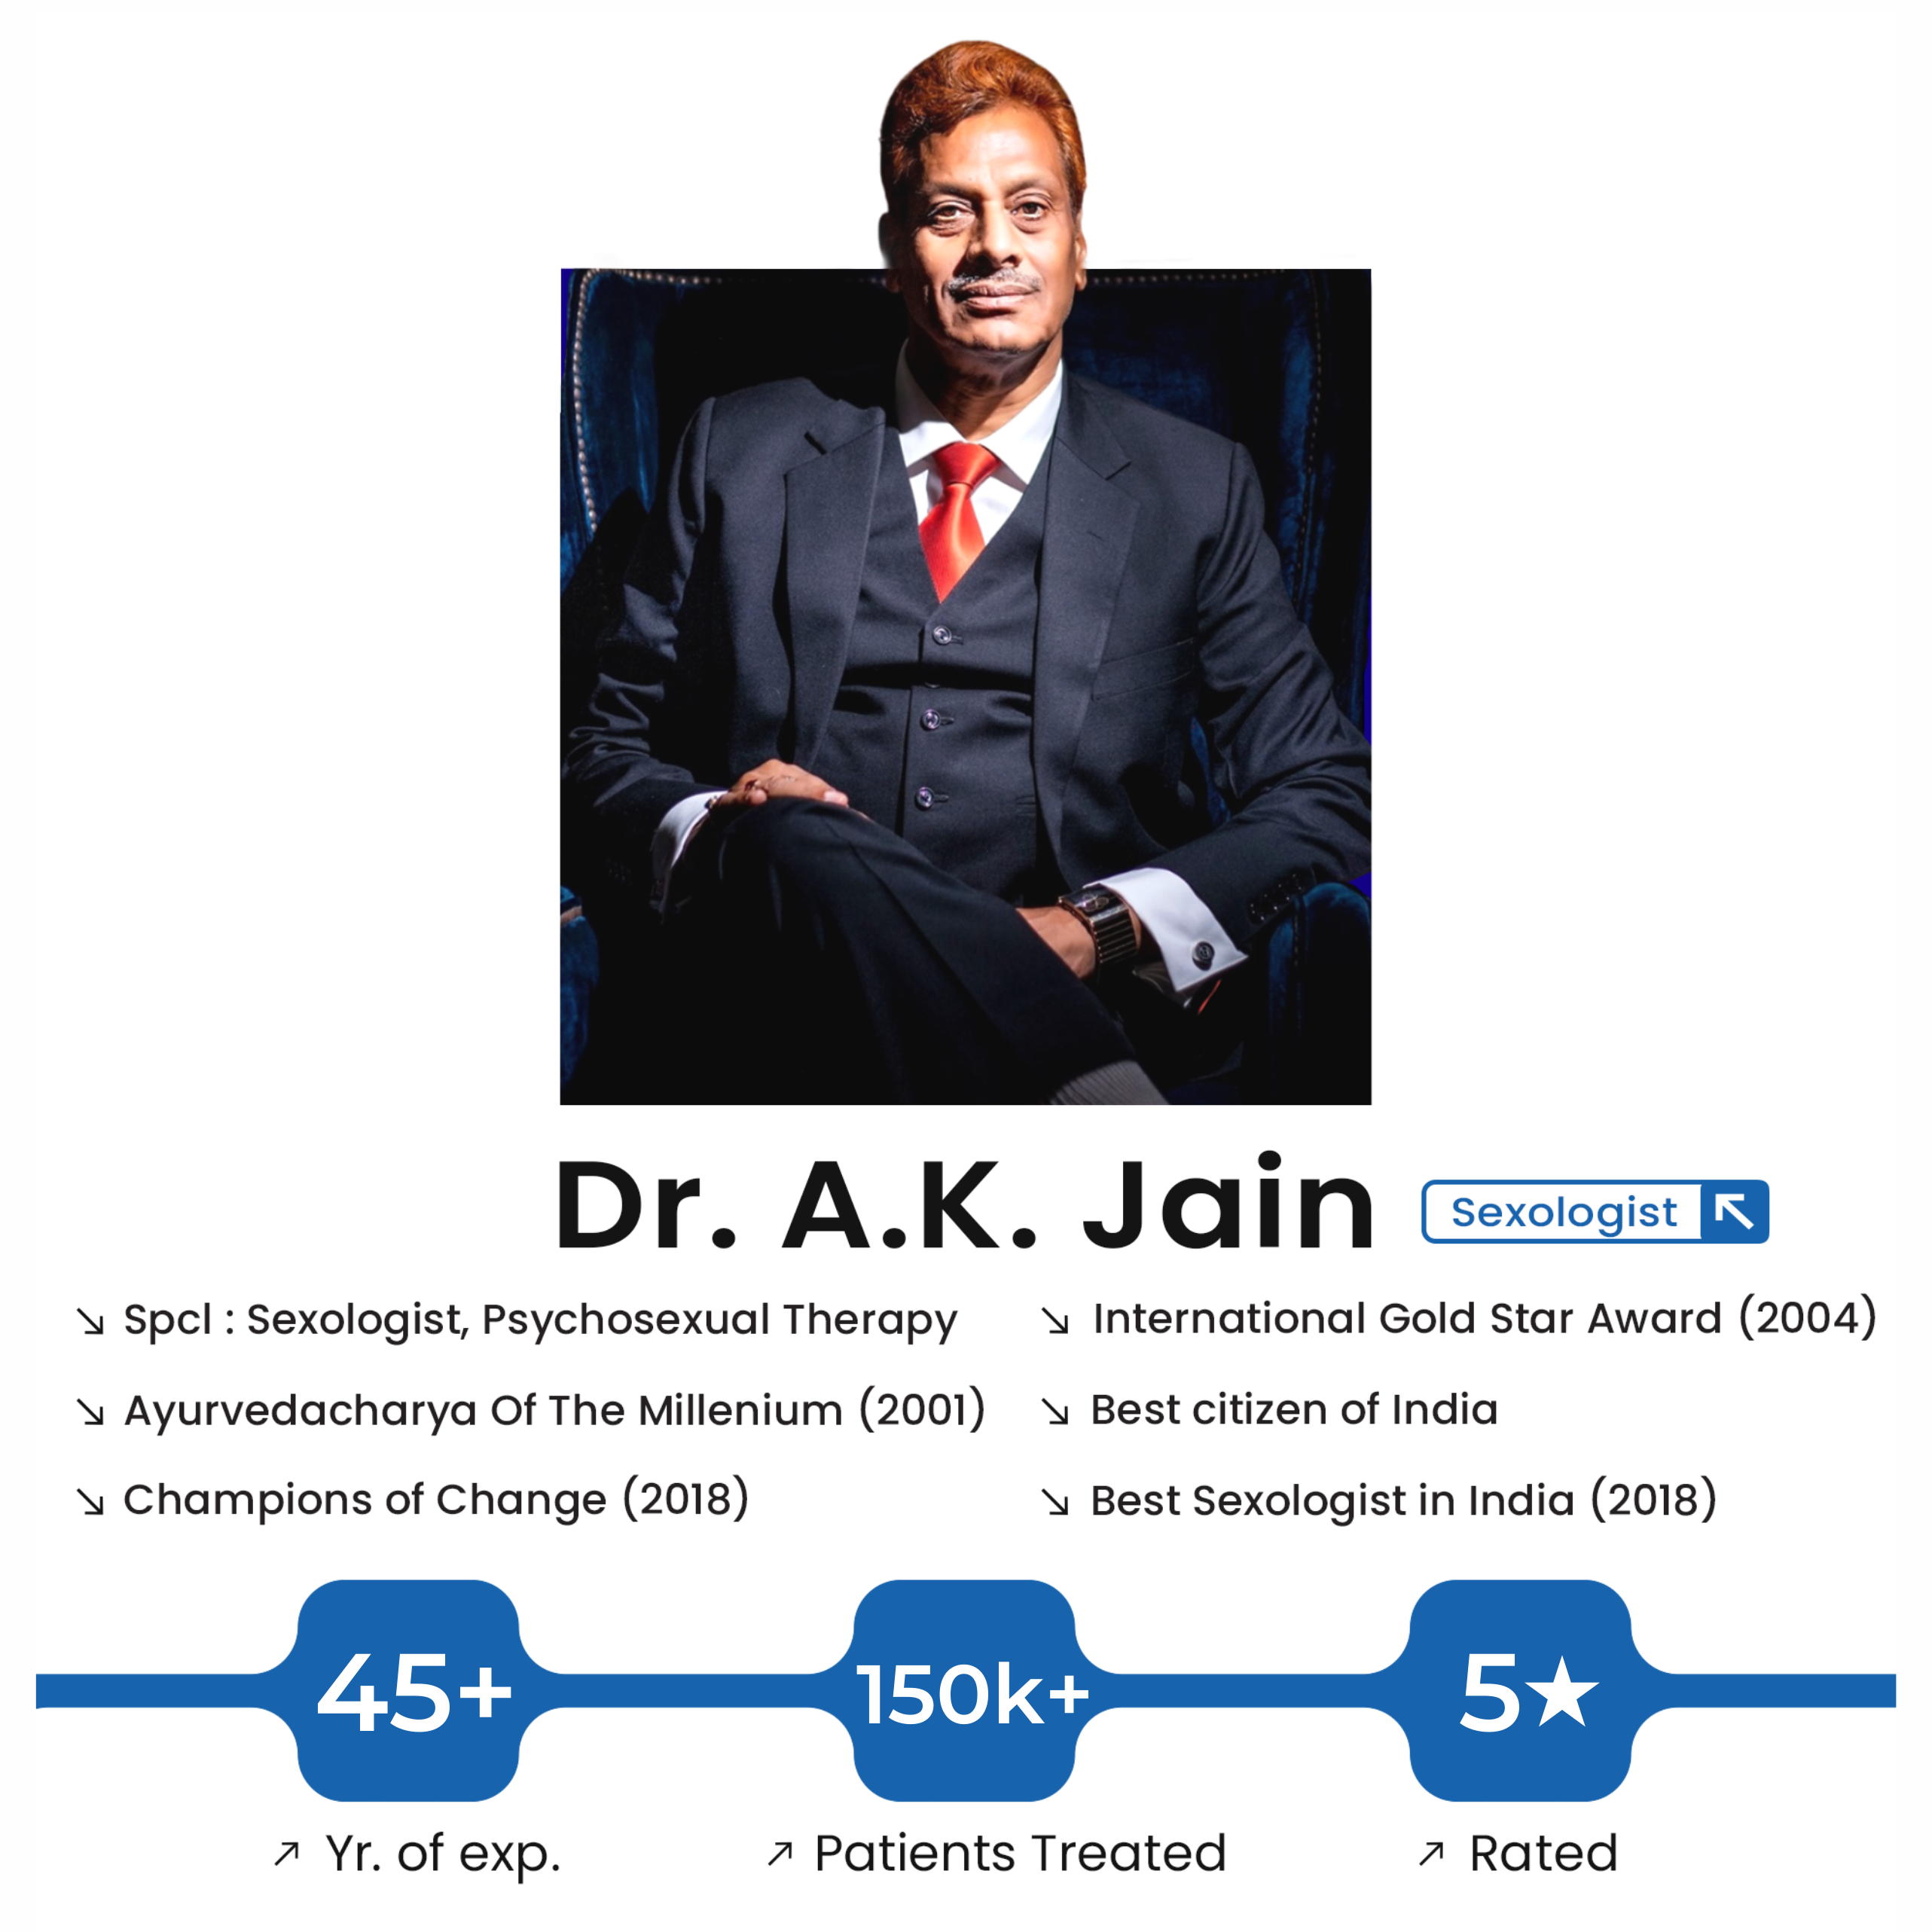 Audio / Video Consultation with Dr A.K. Jain